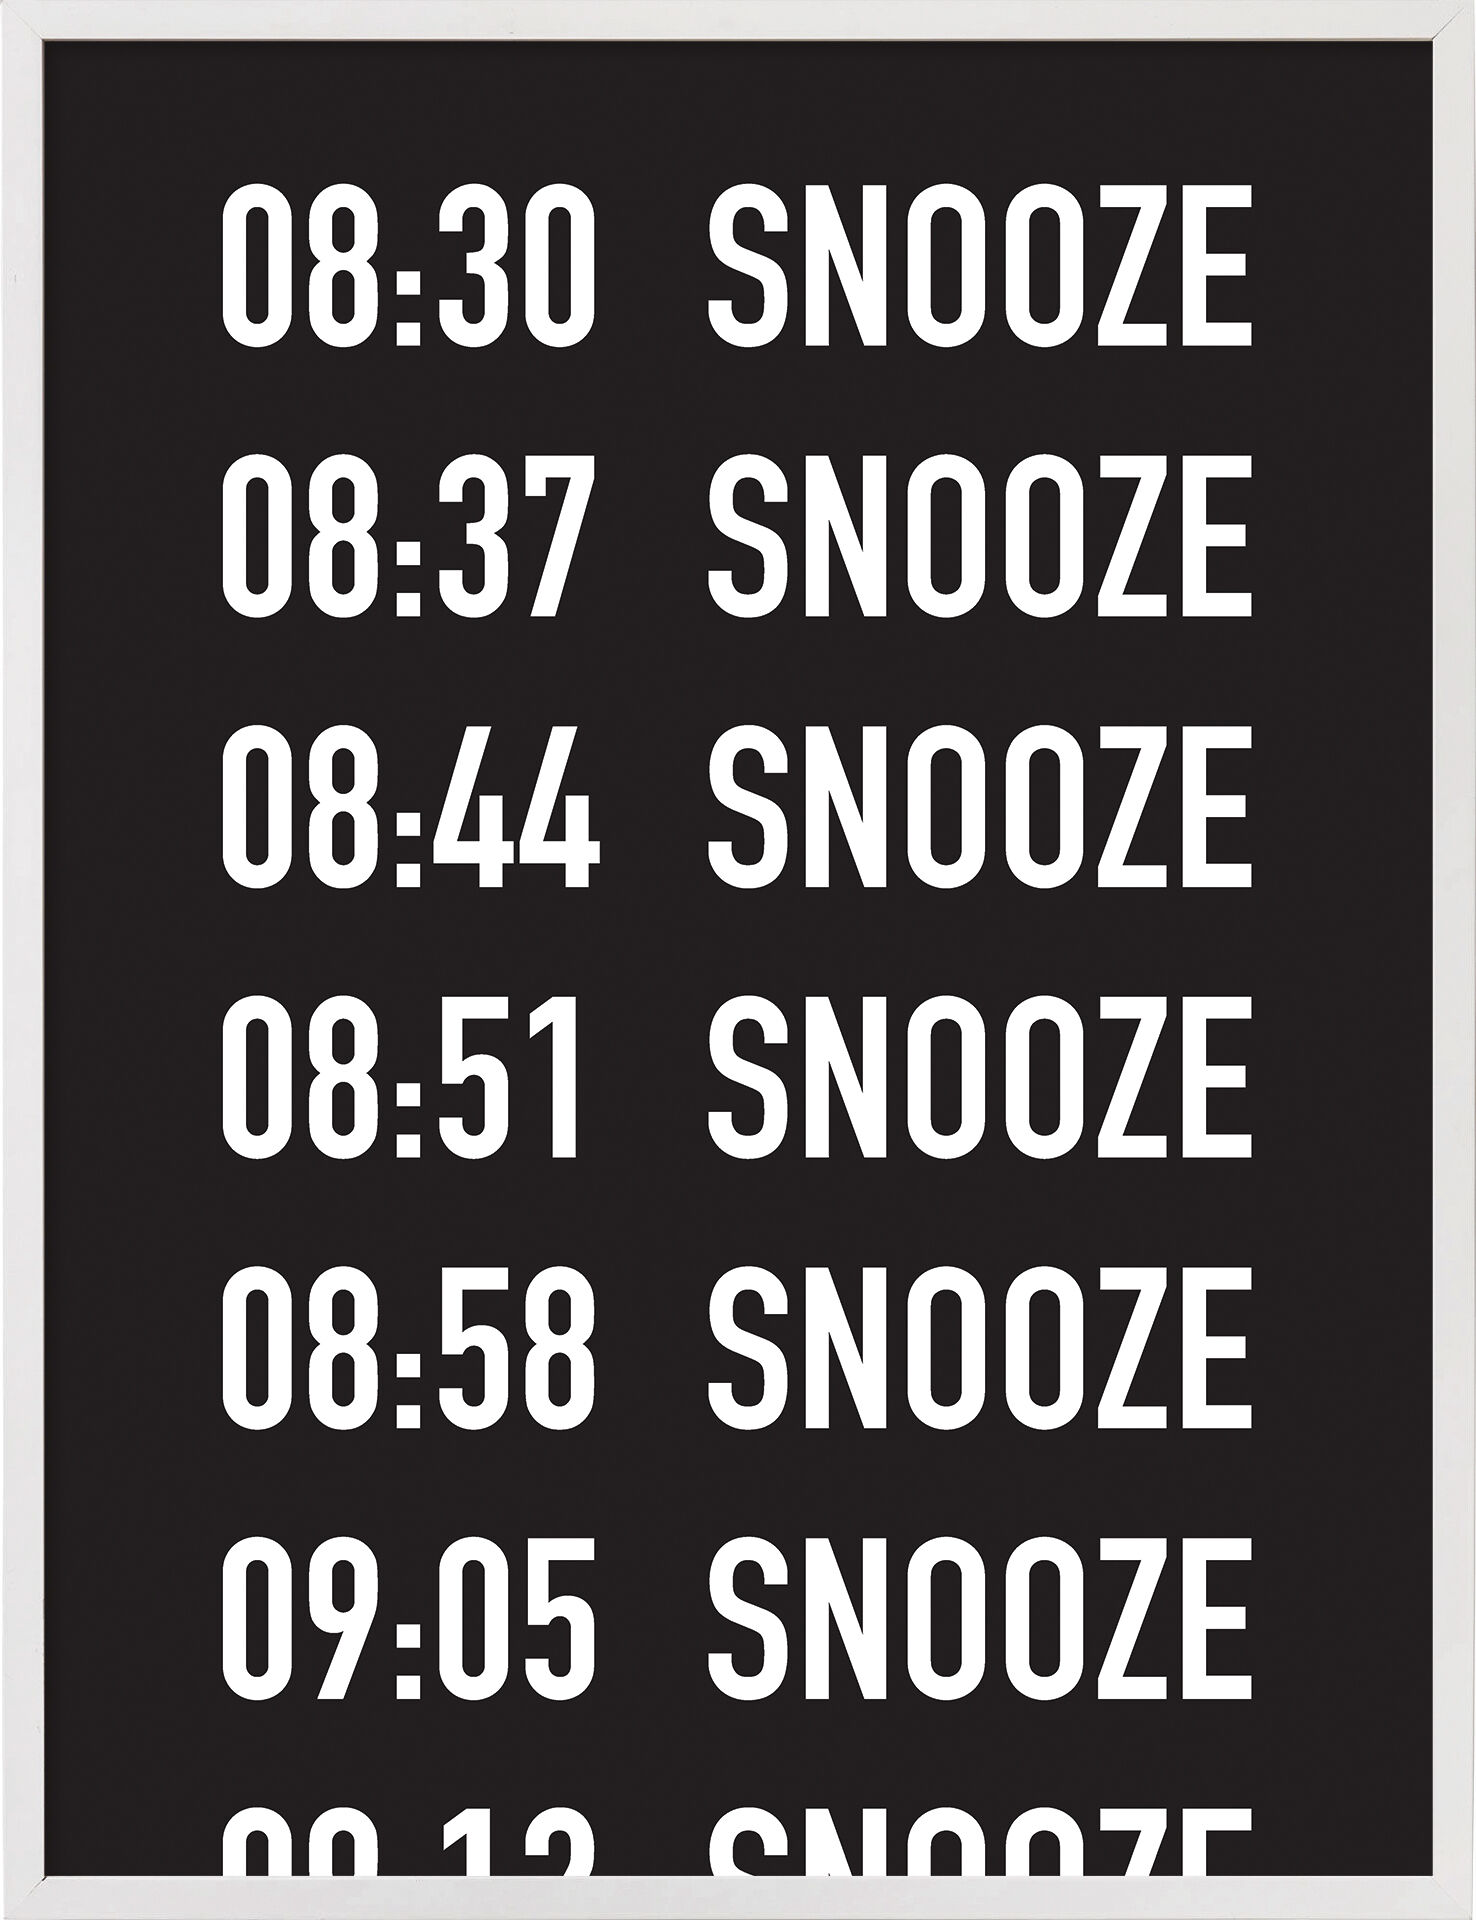 Picture "Snooze" (2016) by Donnie O'Sullivan